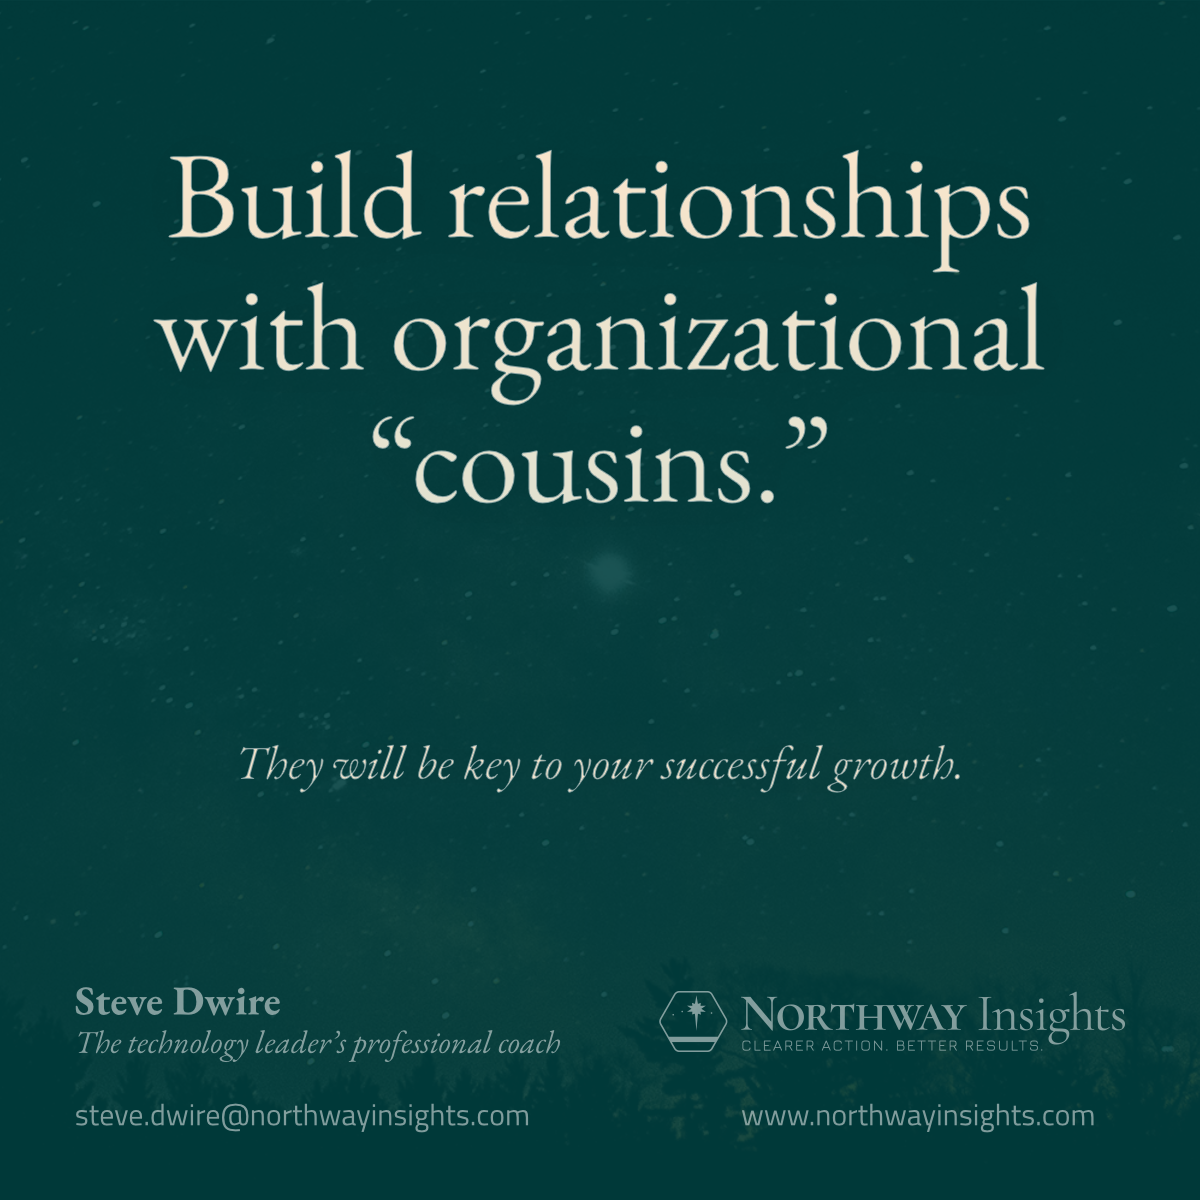 Build relationships with organizational "cousins." (They will be key to your successful growth.)